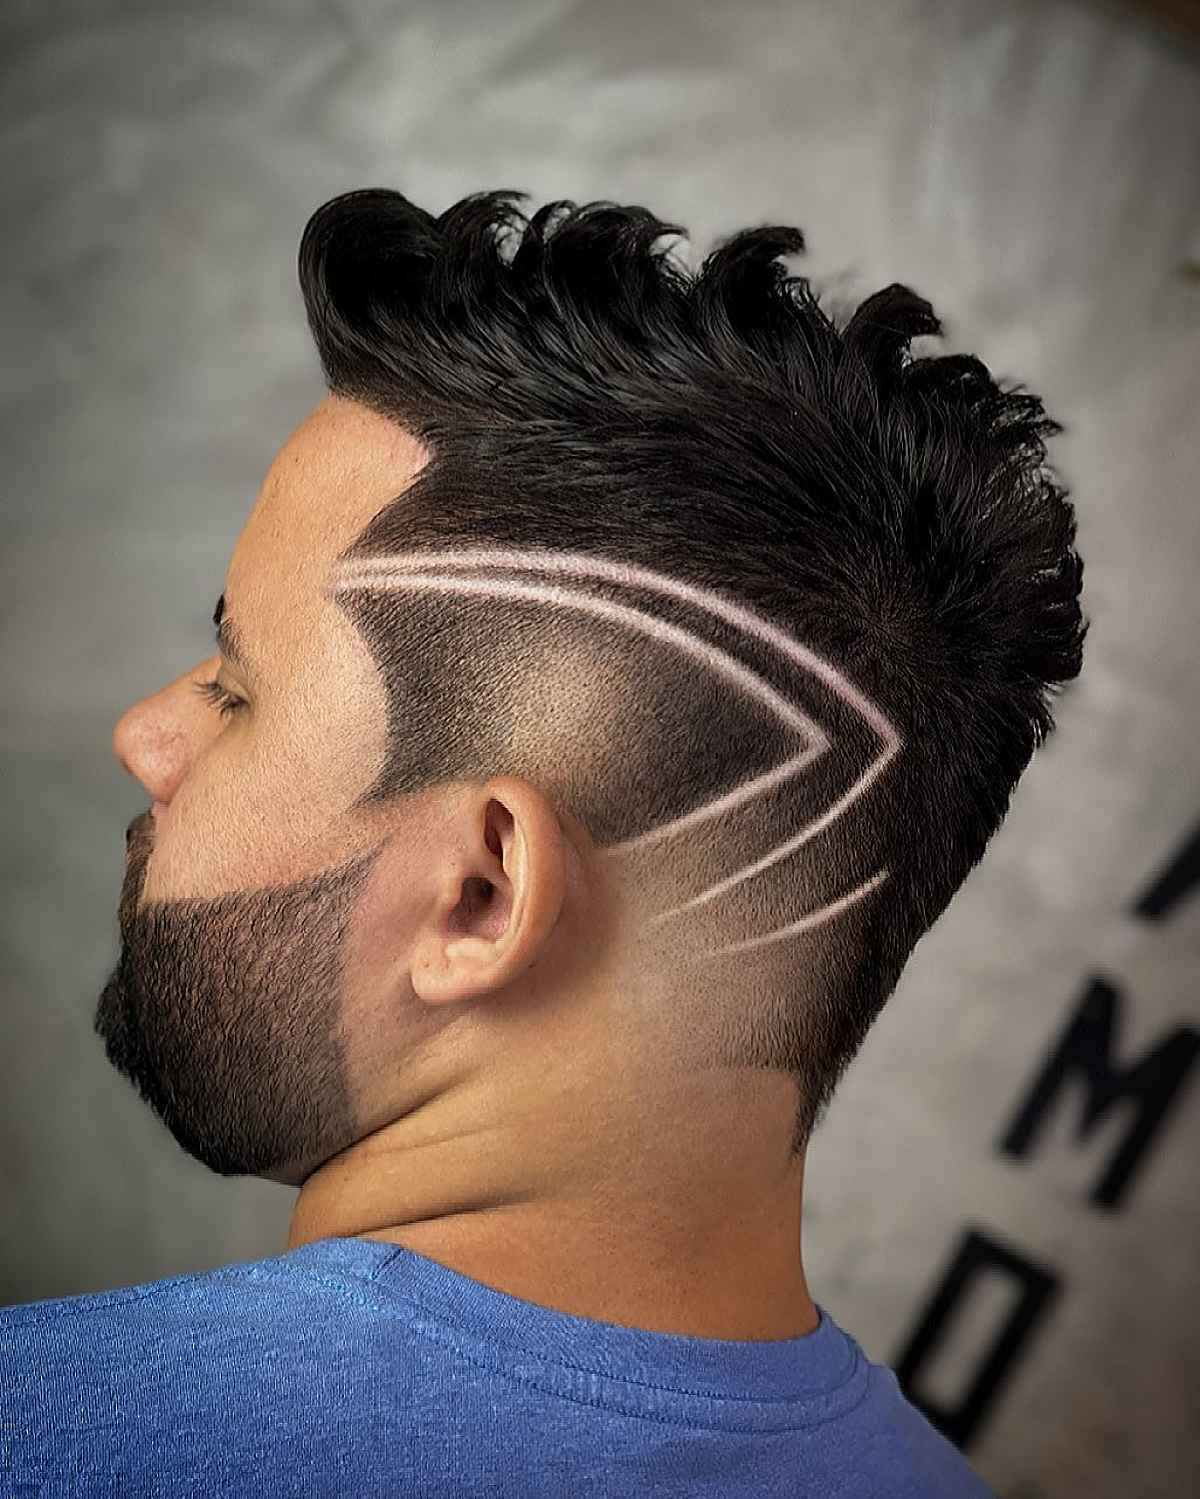 25 Awesome Hair Designs for Men Trending in 2023